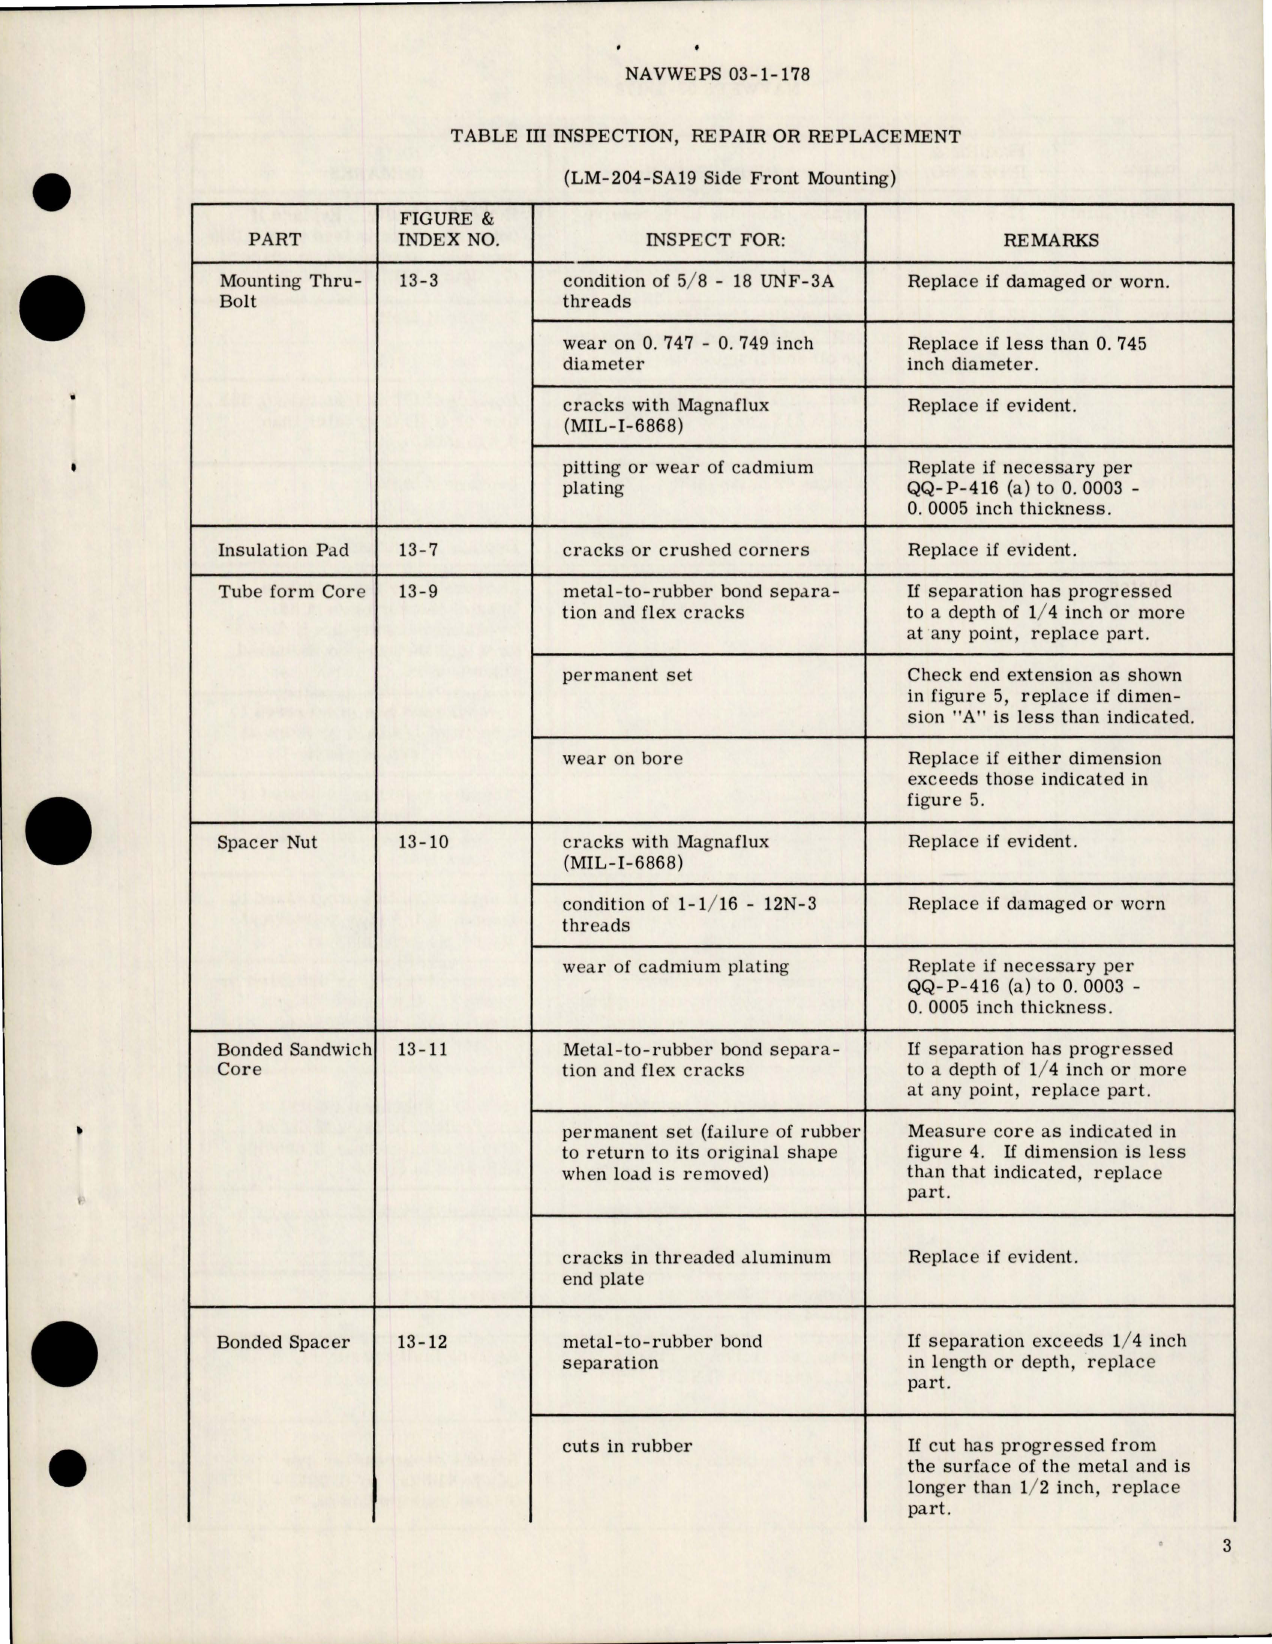 Sample page 5 from AirCorps Library document: Overhaul Instructions with Parts for Dynafocal Engine Mountings 